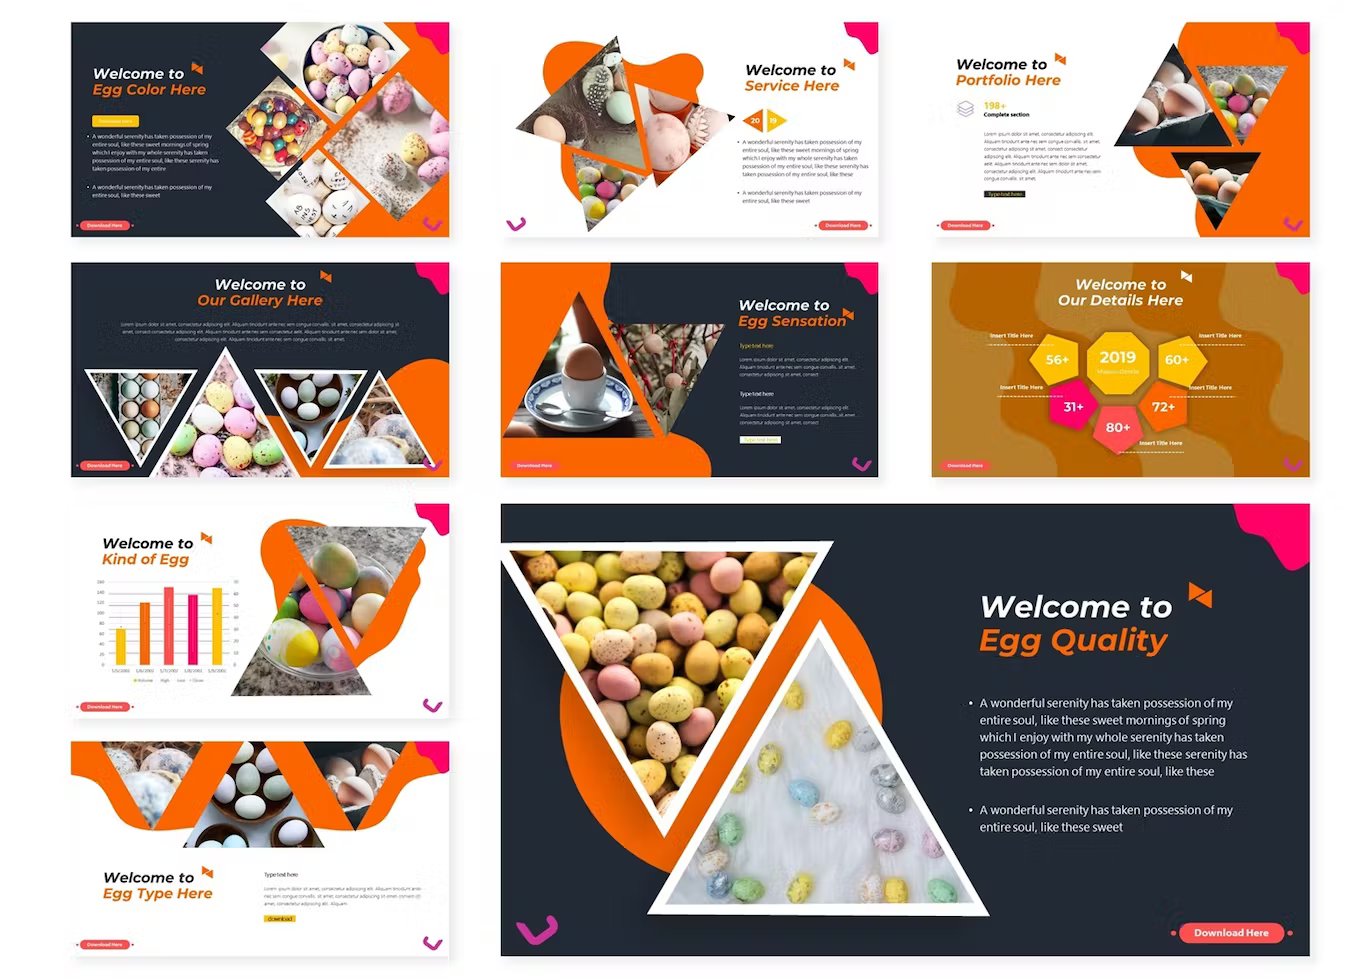 A set of 9 different the easter keynote templates in orange, white, dark gray, yellow and pink on a white background.